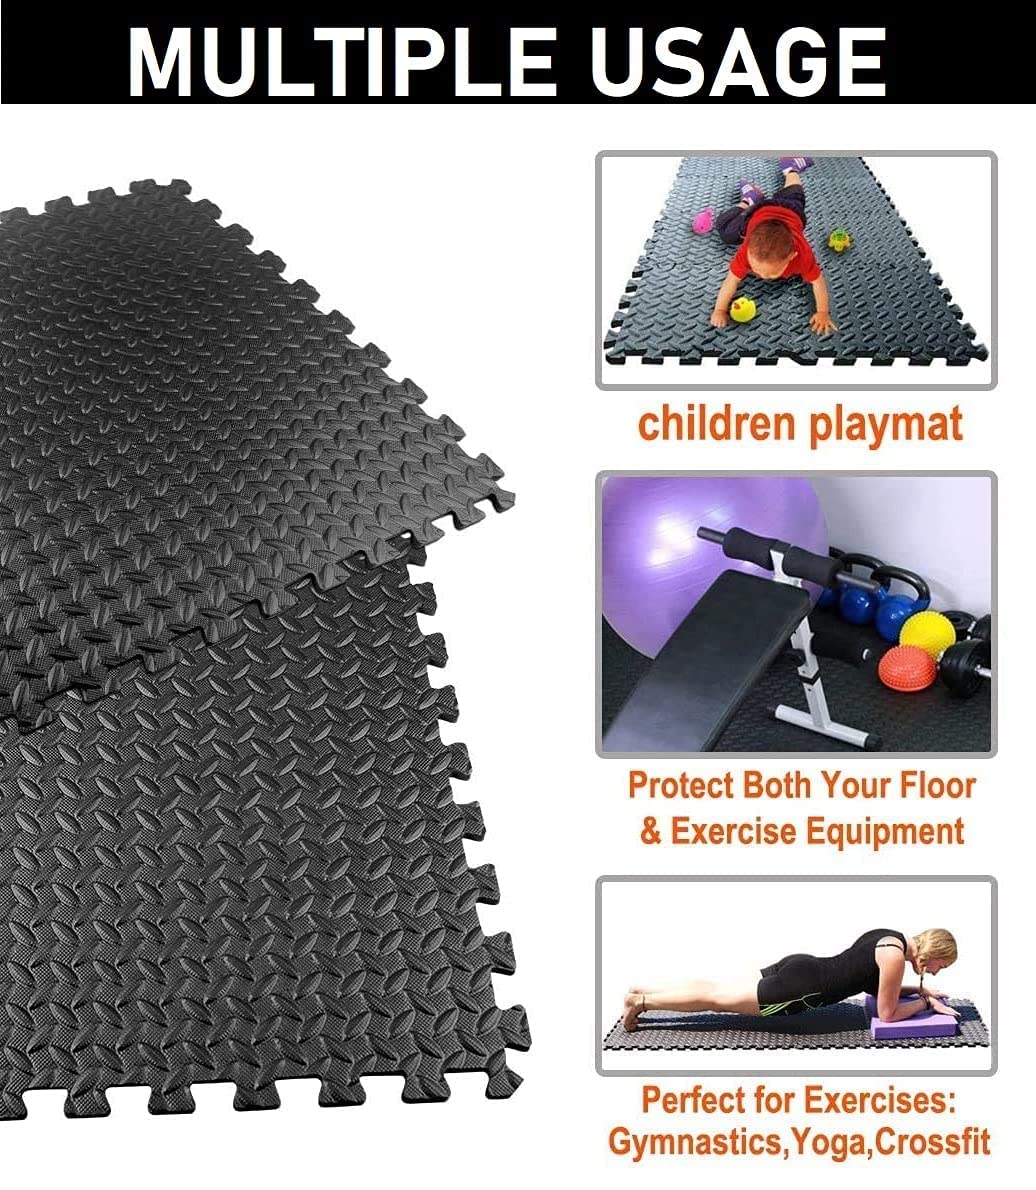 Nasmodo 1 Inch/ 25 mm Thick Gym Floor mats for Heavy Workout at Home,Puzzle Floor mat for Gym Exercise, Yoga Interlocking EVA Foam for Kids(60 * 60cm)